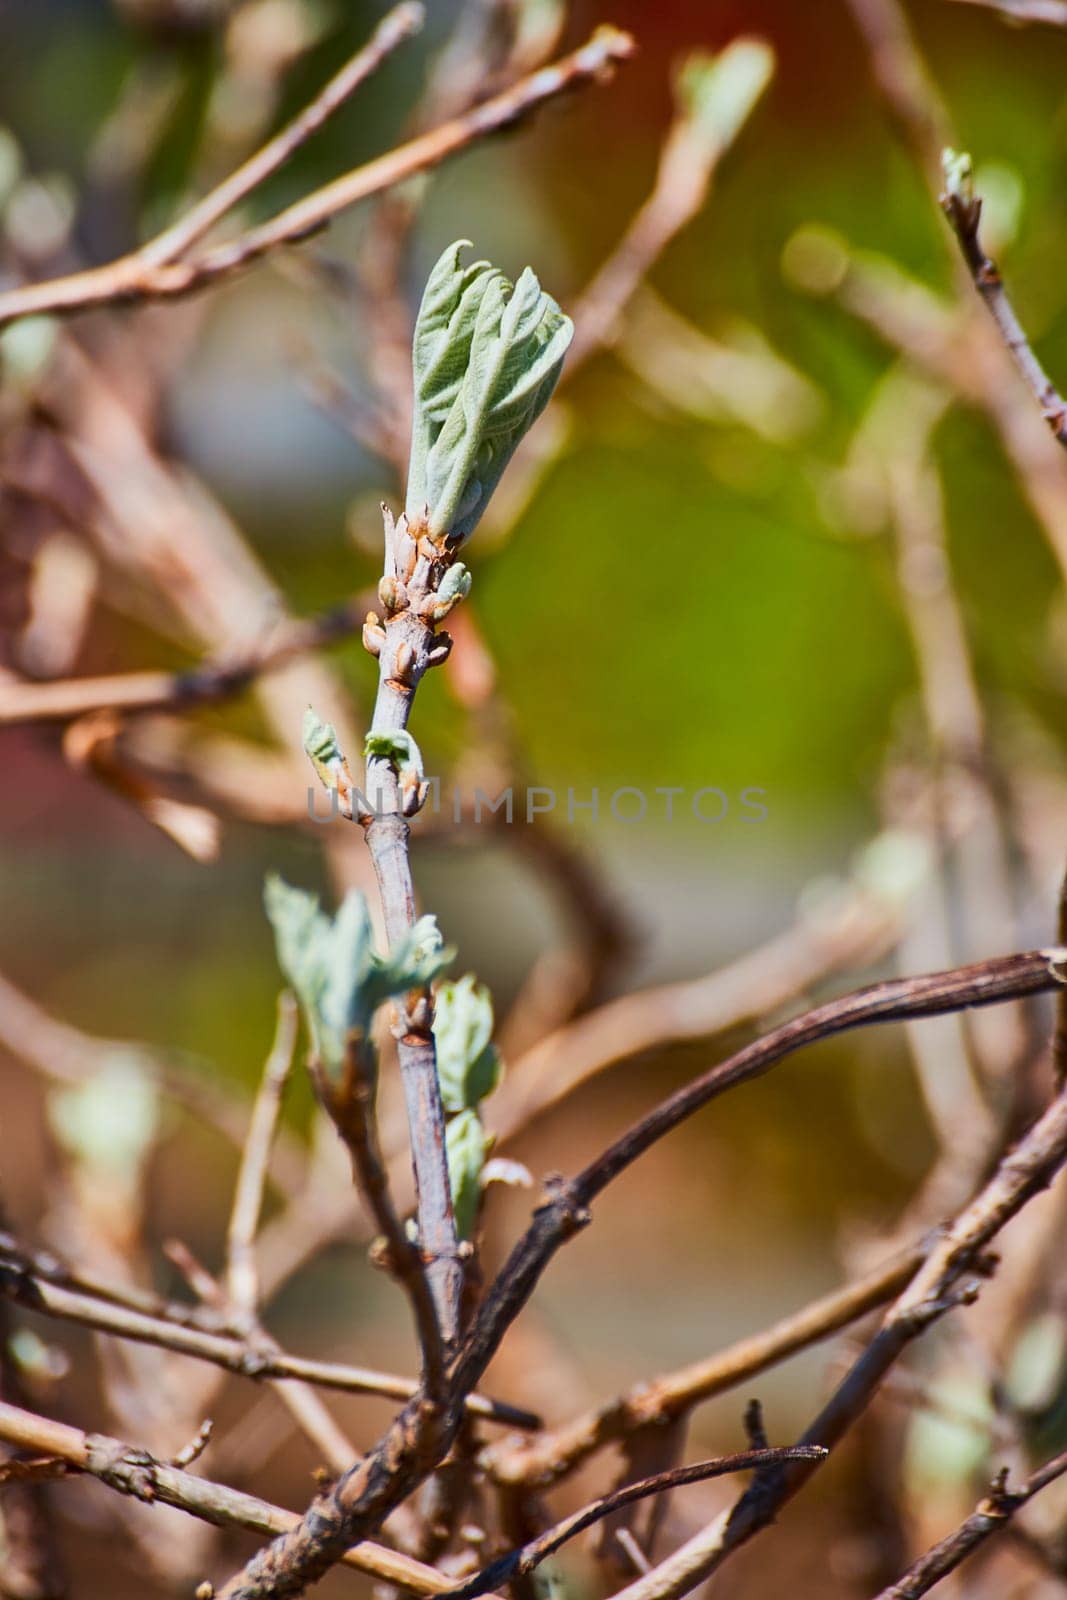 Early spring in Fort Wayne: fresh leaf budding on a twig, symbolizing new beginnings and nature's renewal.